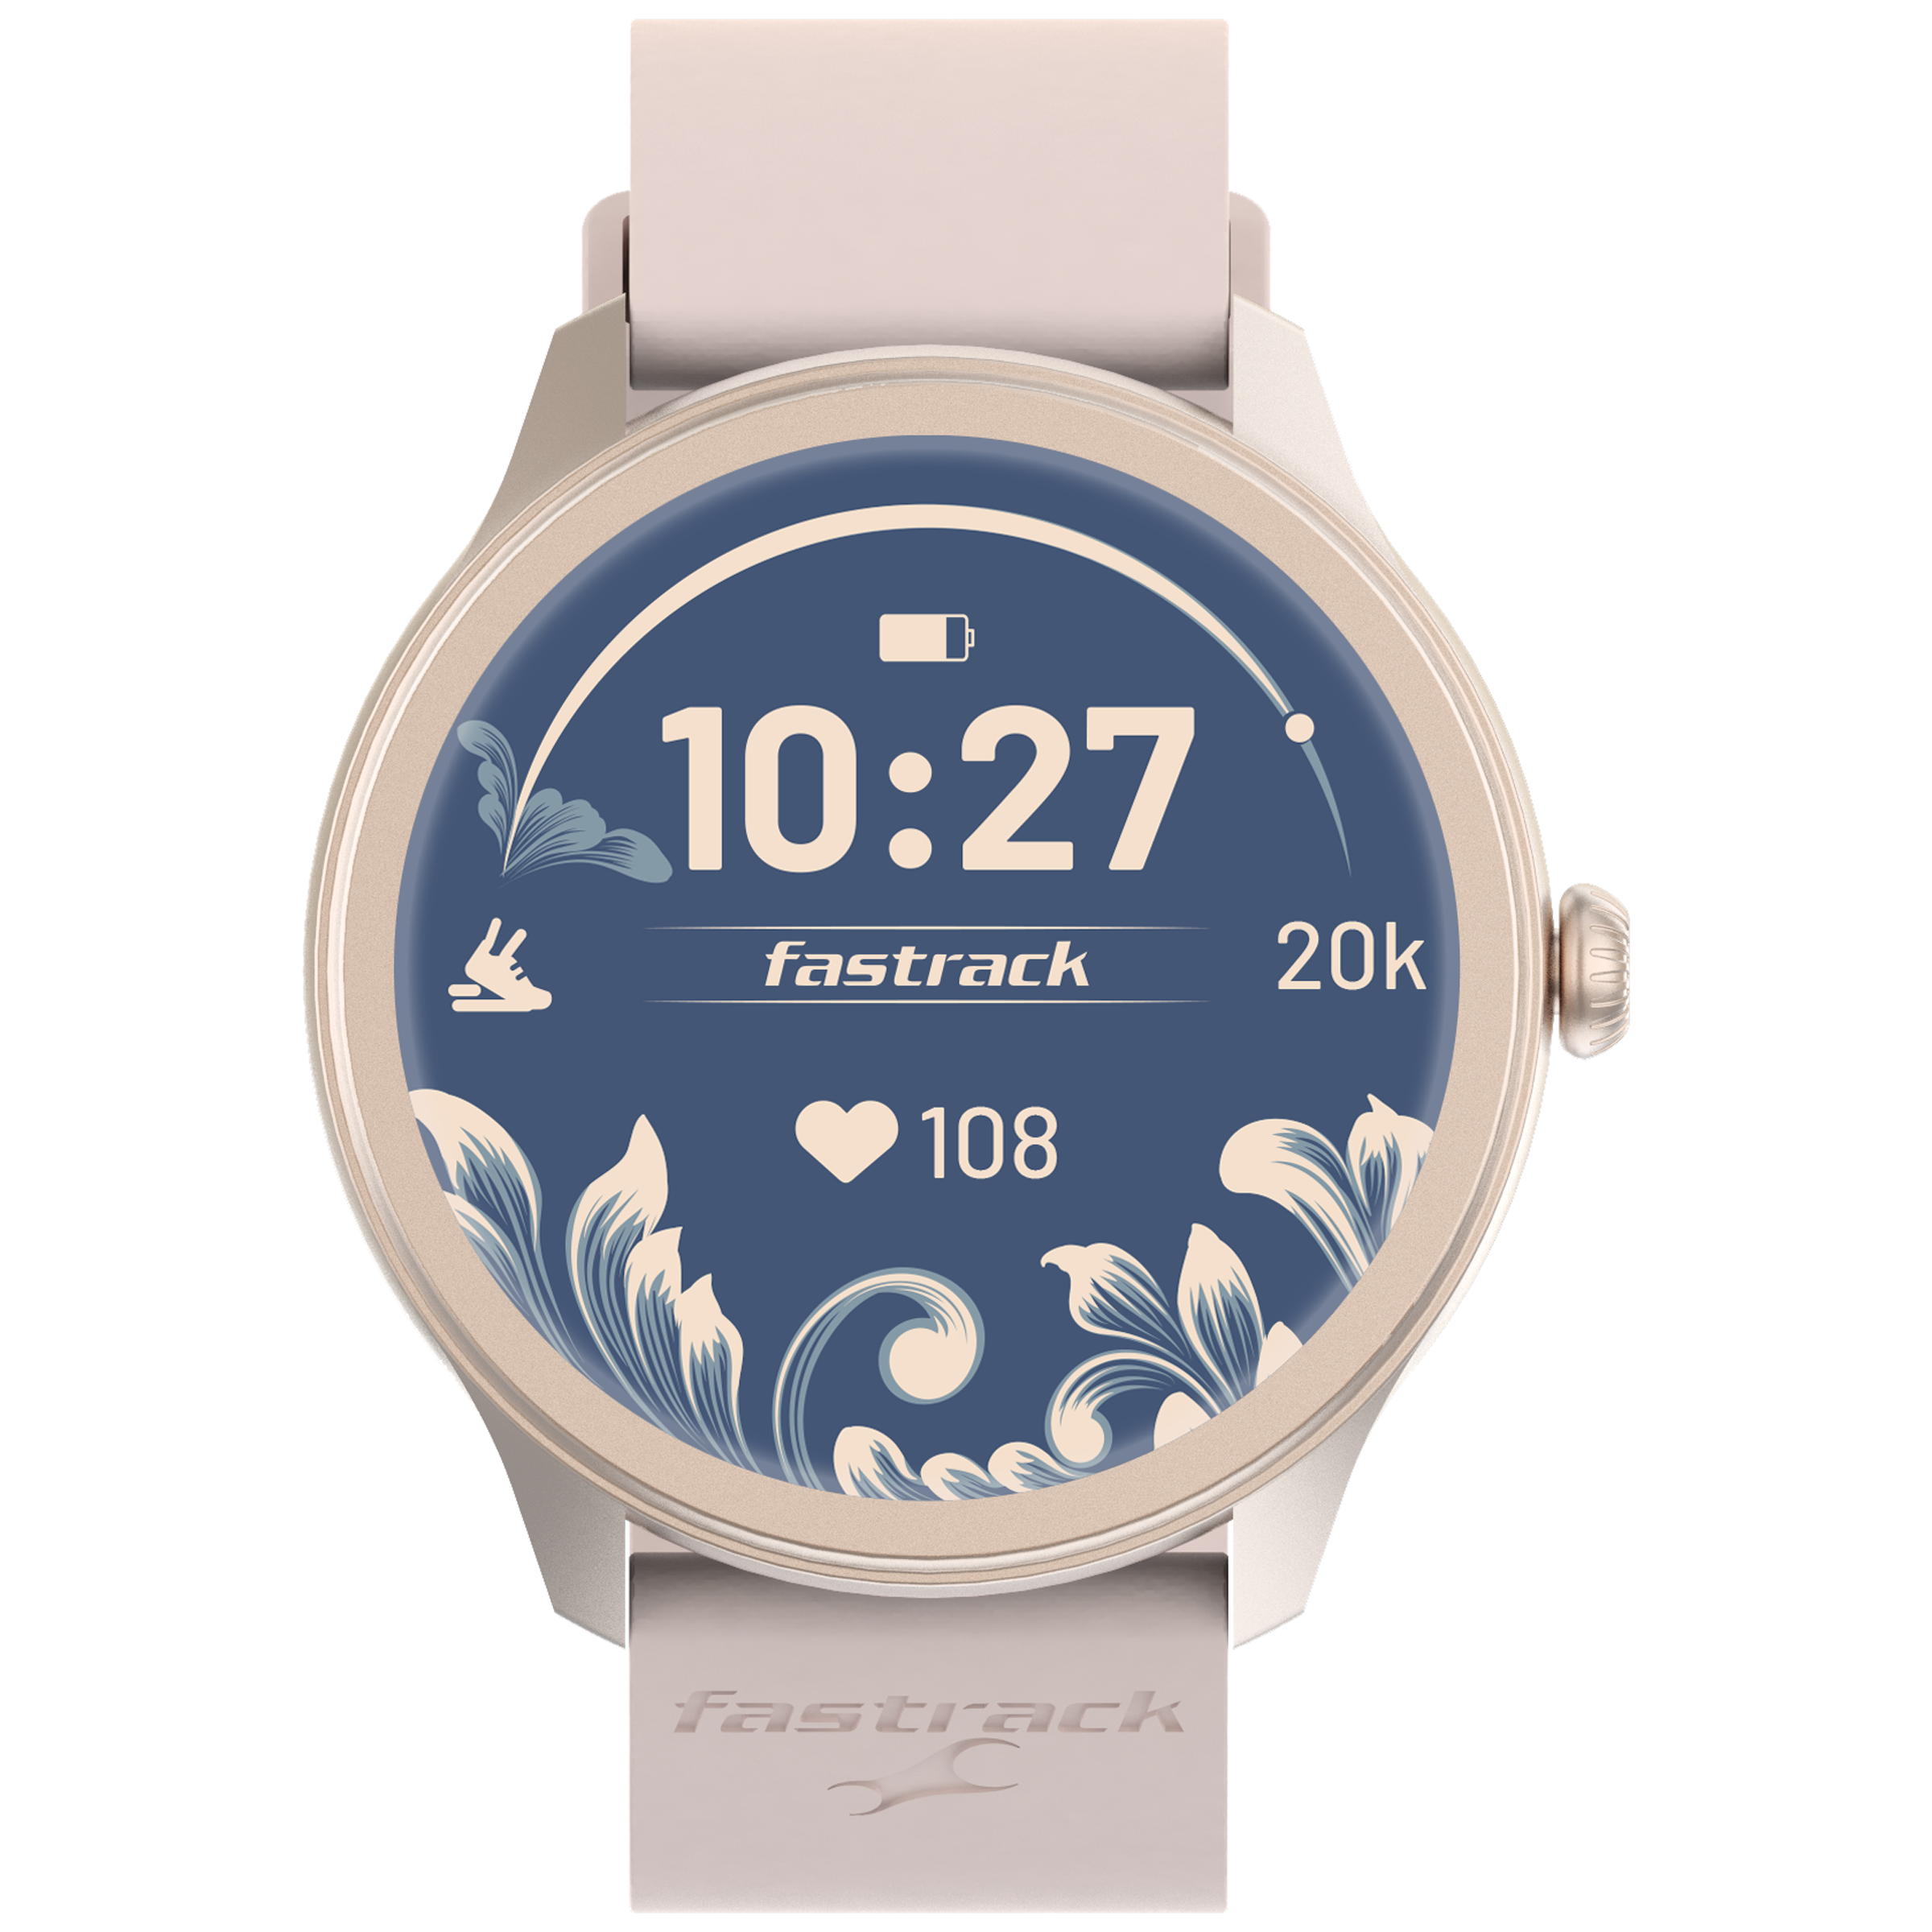 fastrack Reflex Invoke Smartwatch with Bluetooth Calling (35.3mm TFT LCD Display, IP68 Water Resistant, Pink Strap)